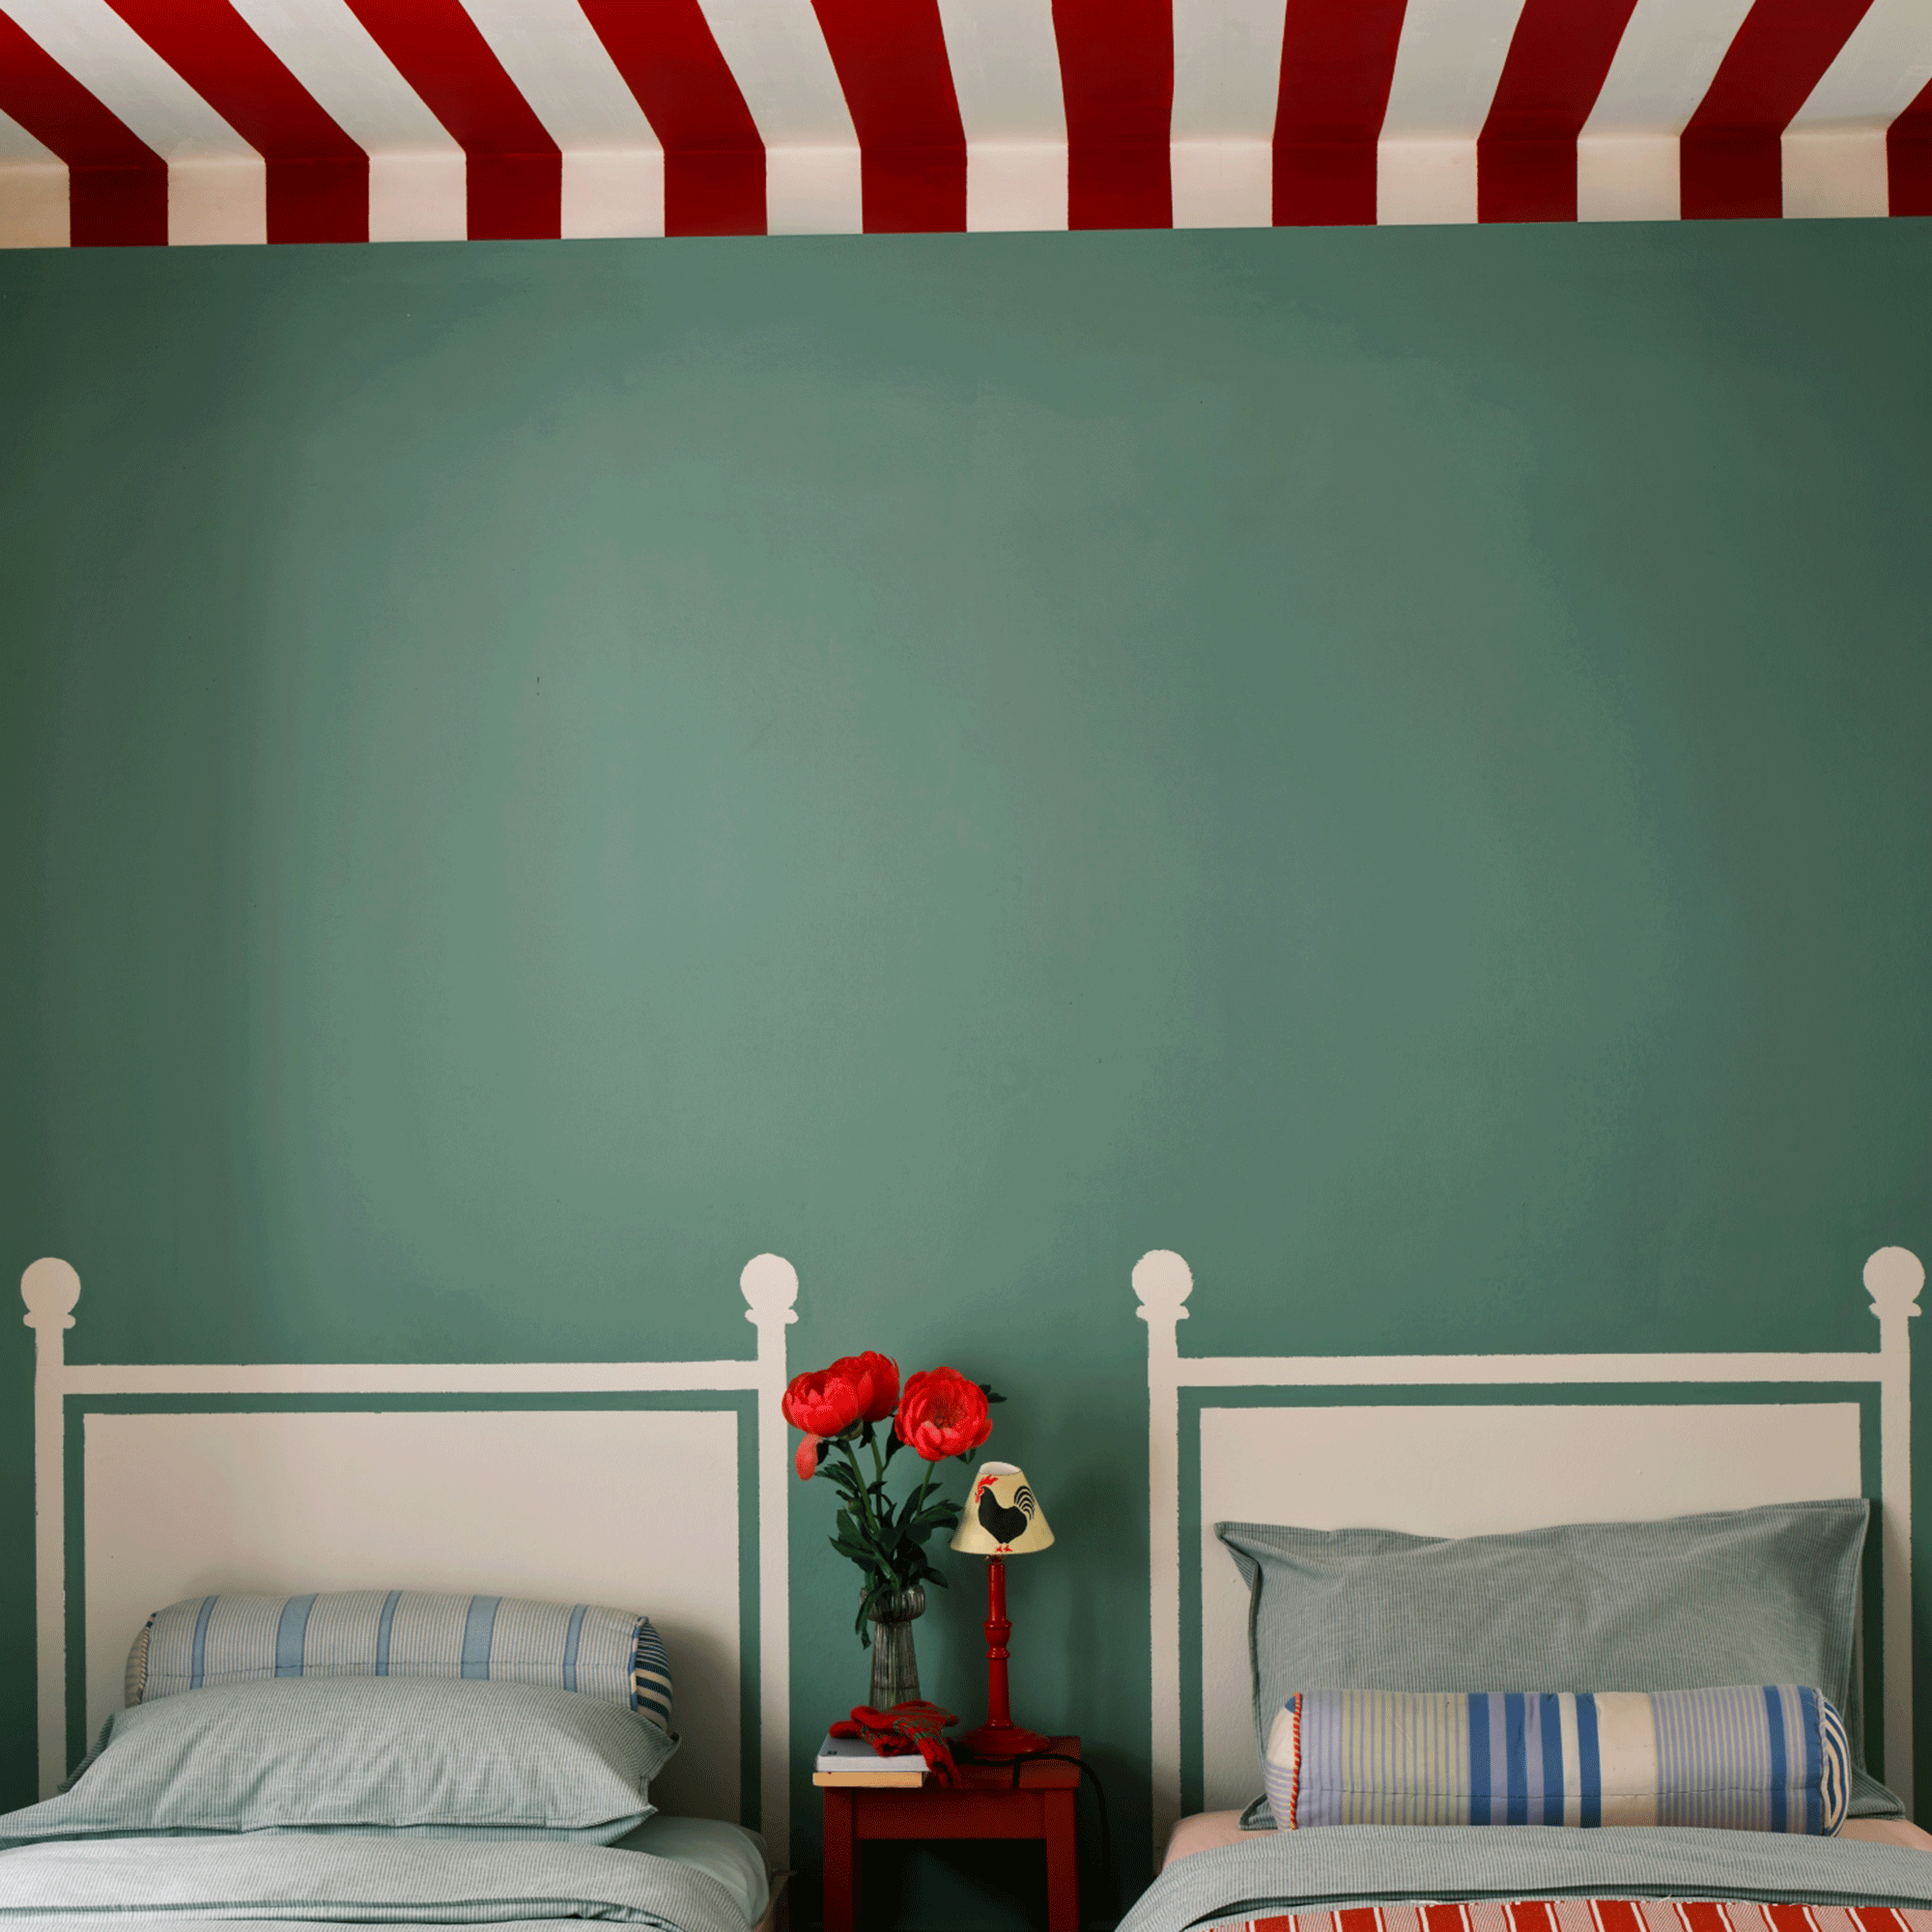 Striped red and white ceiling and white painted headboard